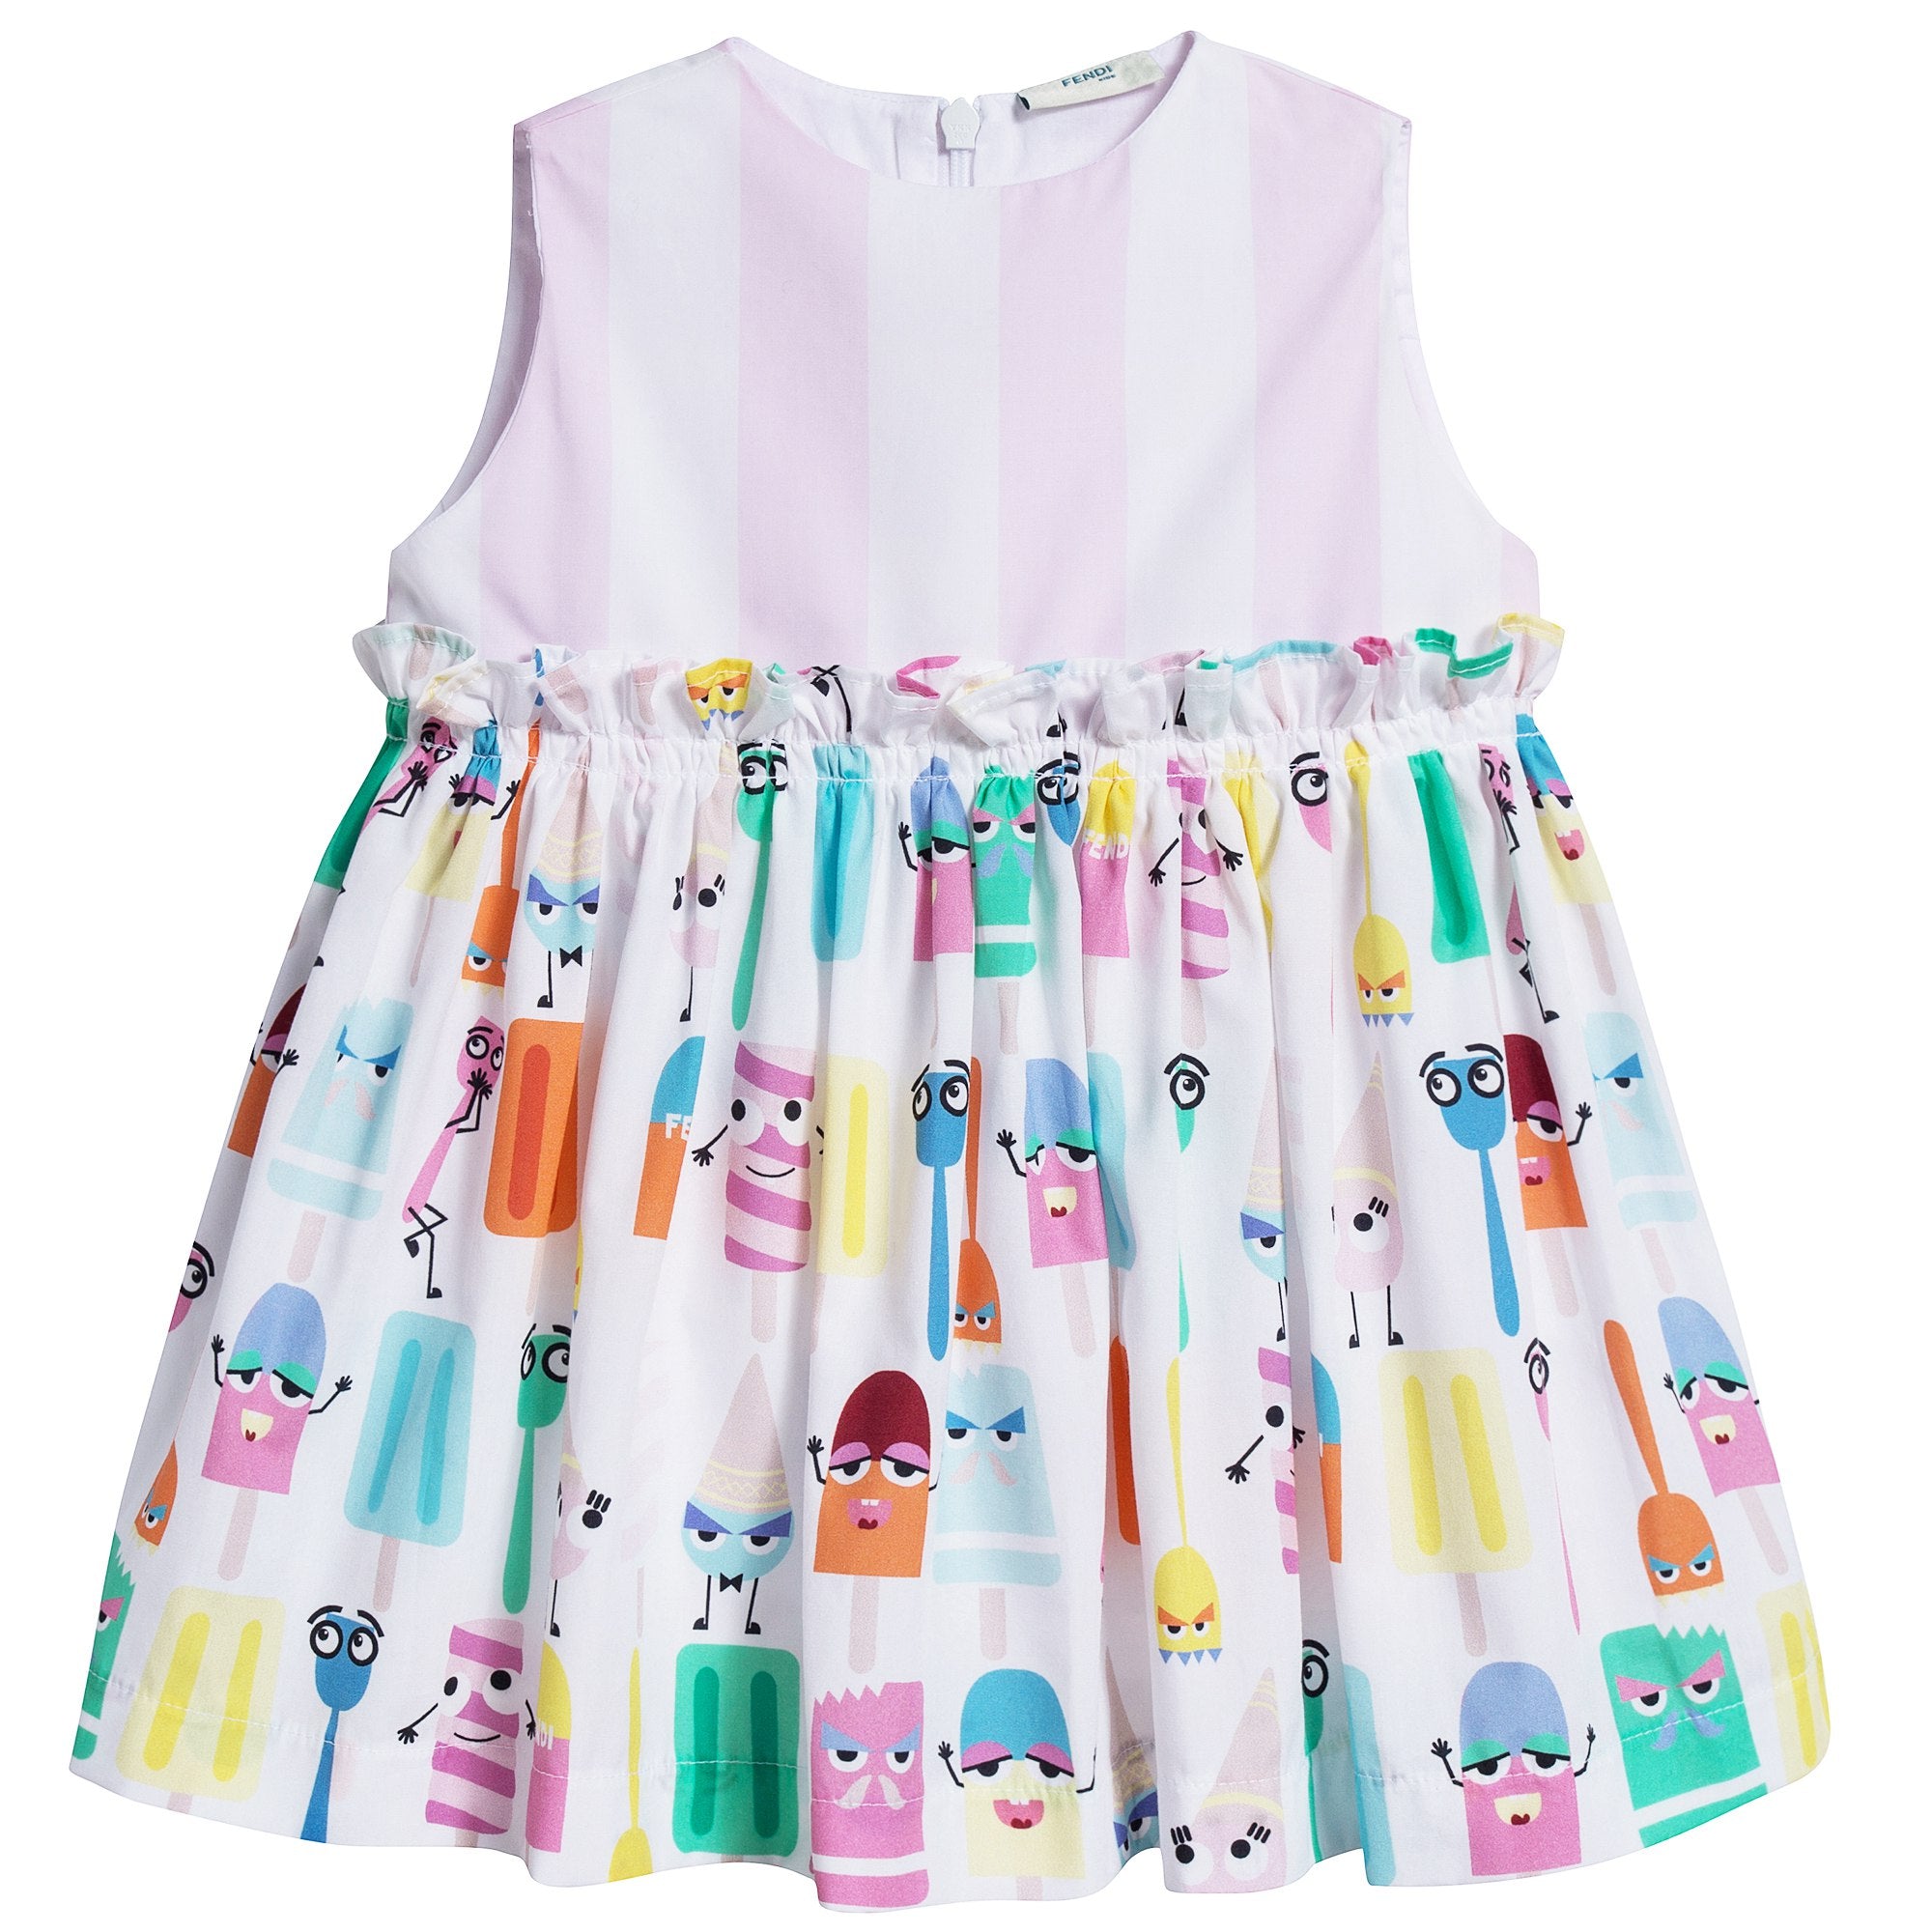 Baby Girls White & Multicolor Printed Dress